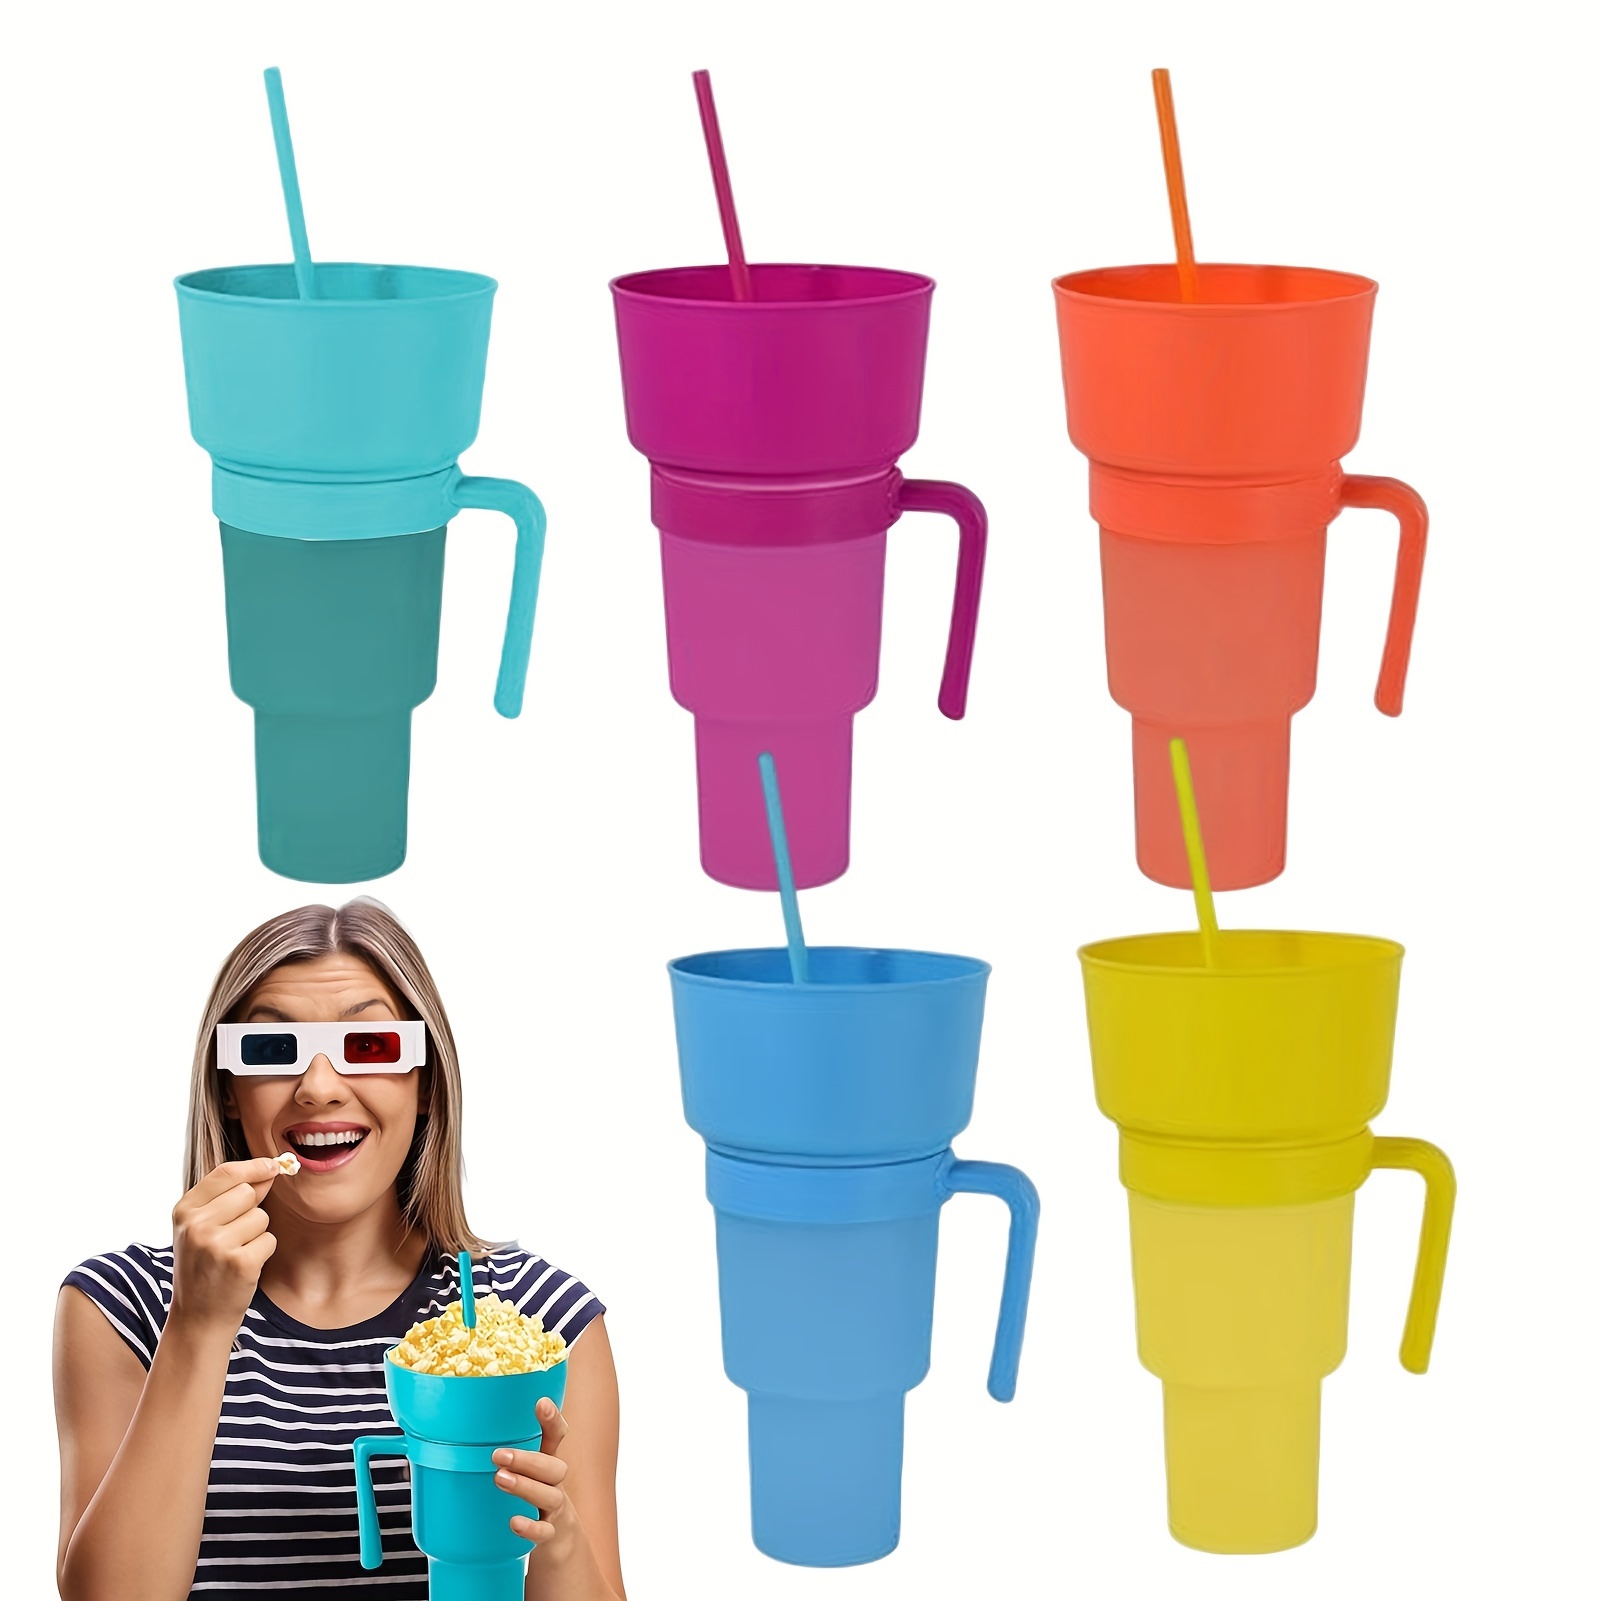 Snack and Drink Cup, Cup Bowl Combo with Straw, Stadium Tumbler-32oz Color  Changing Stadium Cups for Cinema, Snackeez Cups with Top Bowl for Popcorn